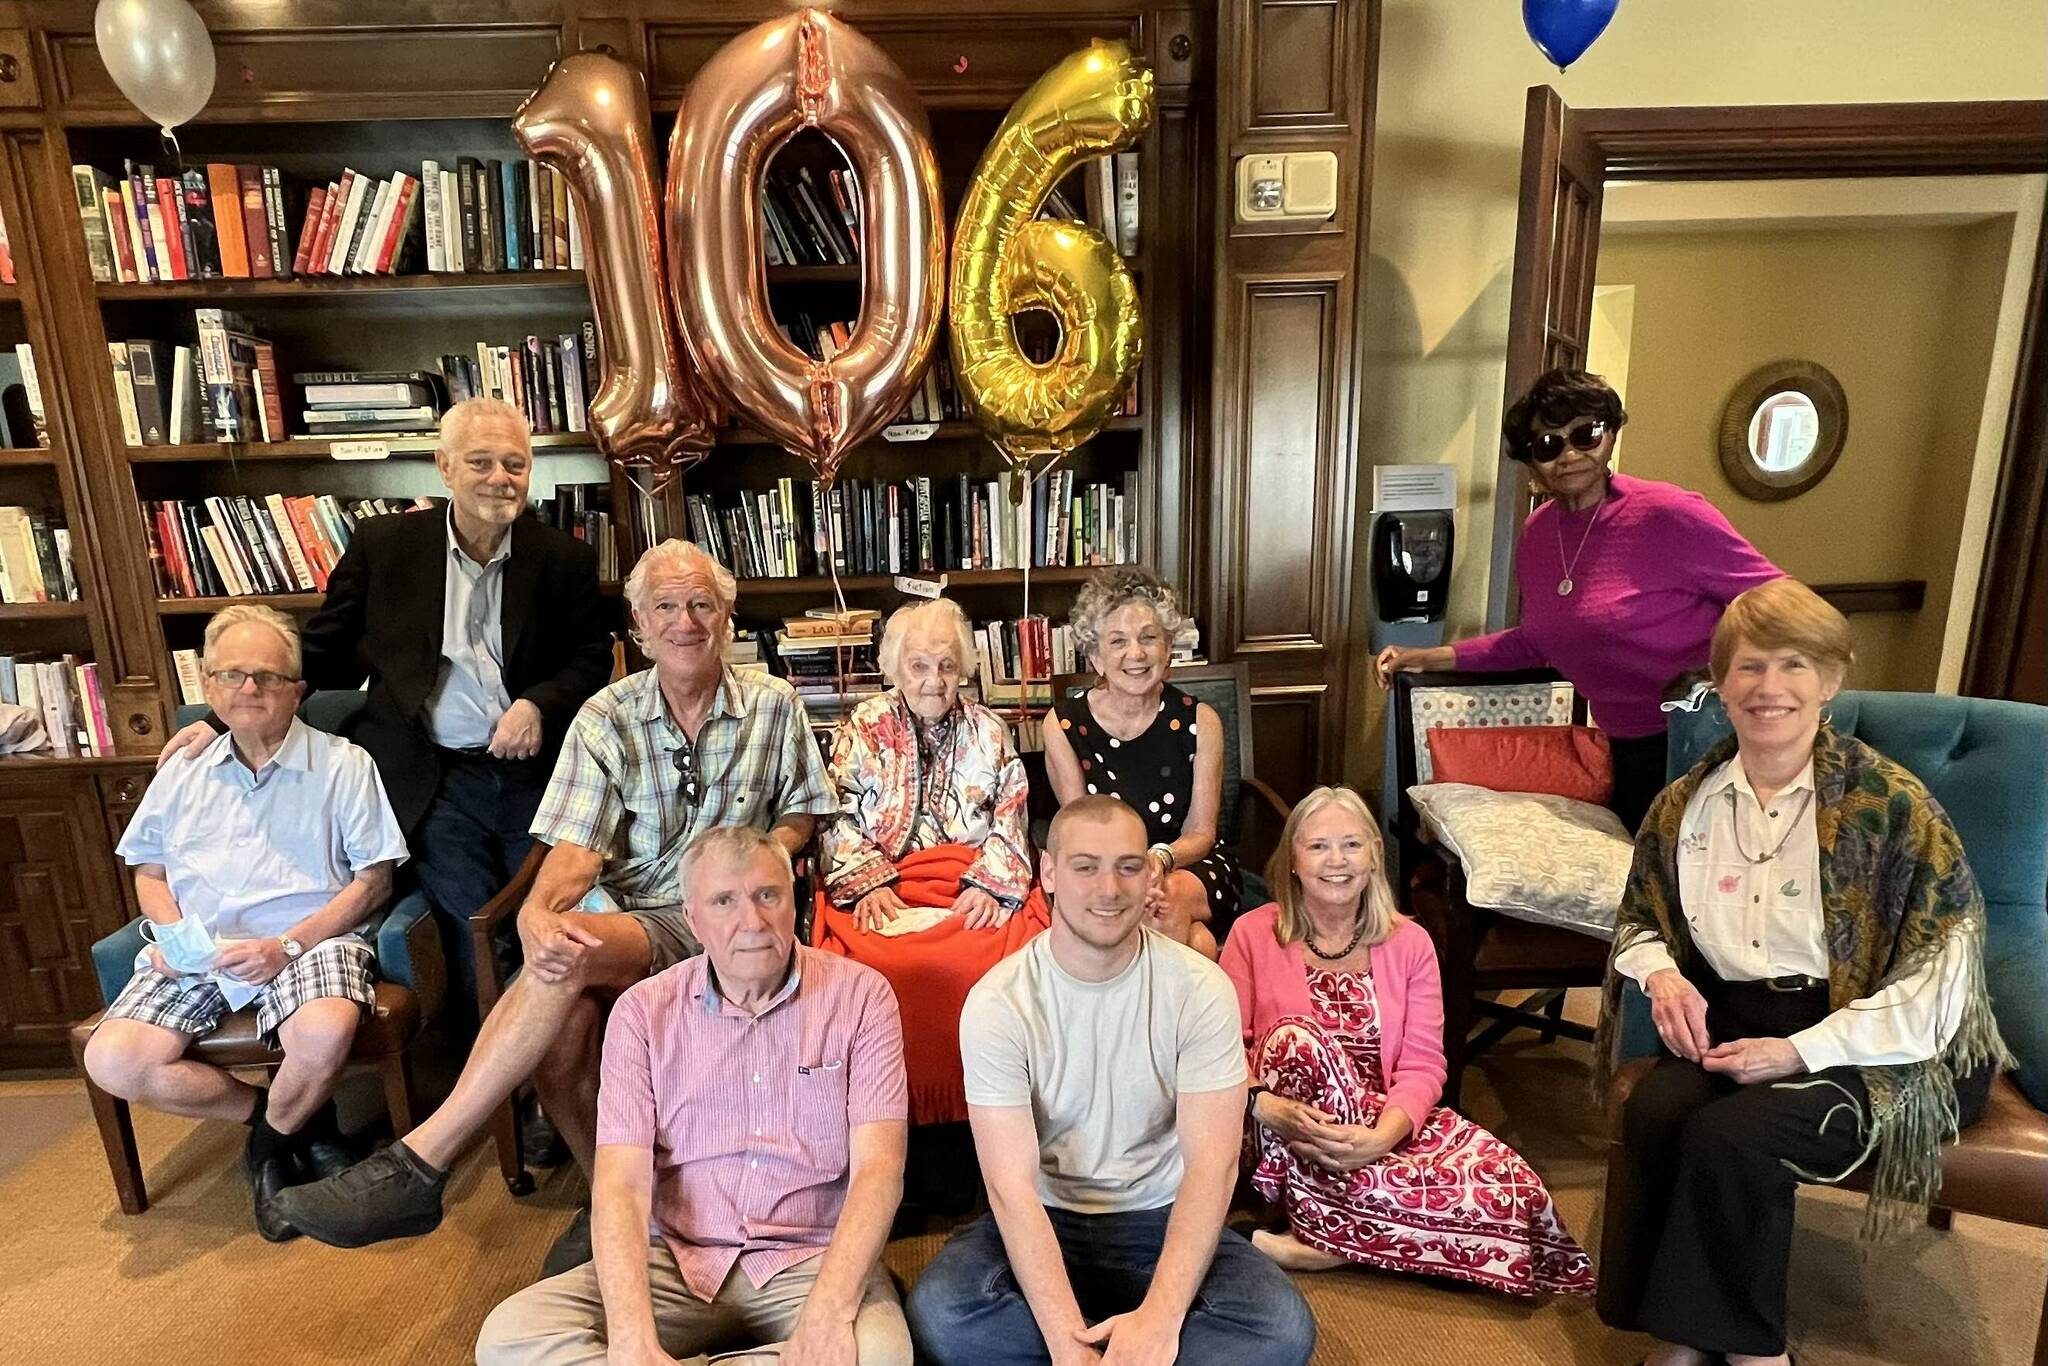 Hilde Bruell’s family and friends sit with her for a photo at her 106th birthday celebration.